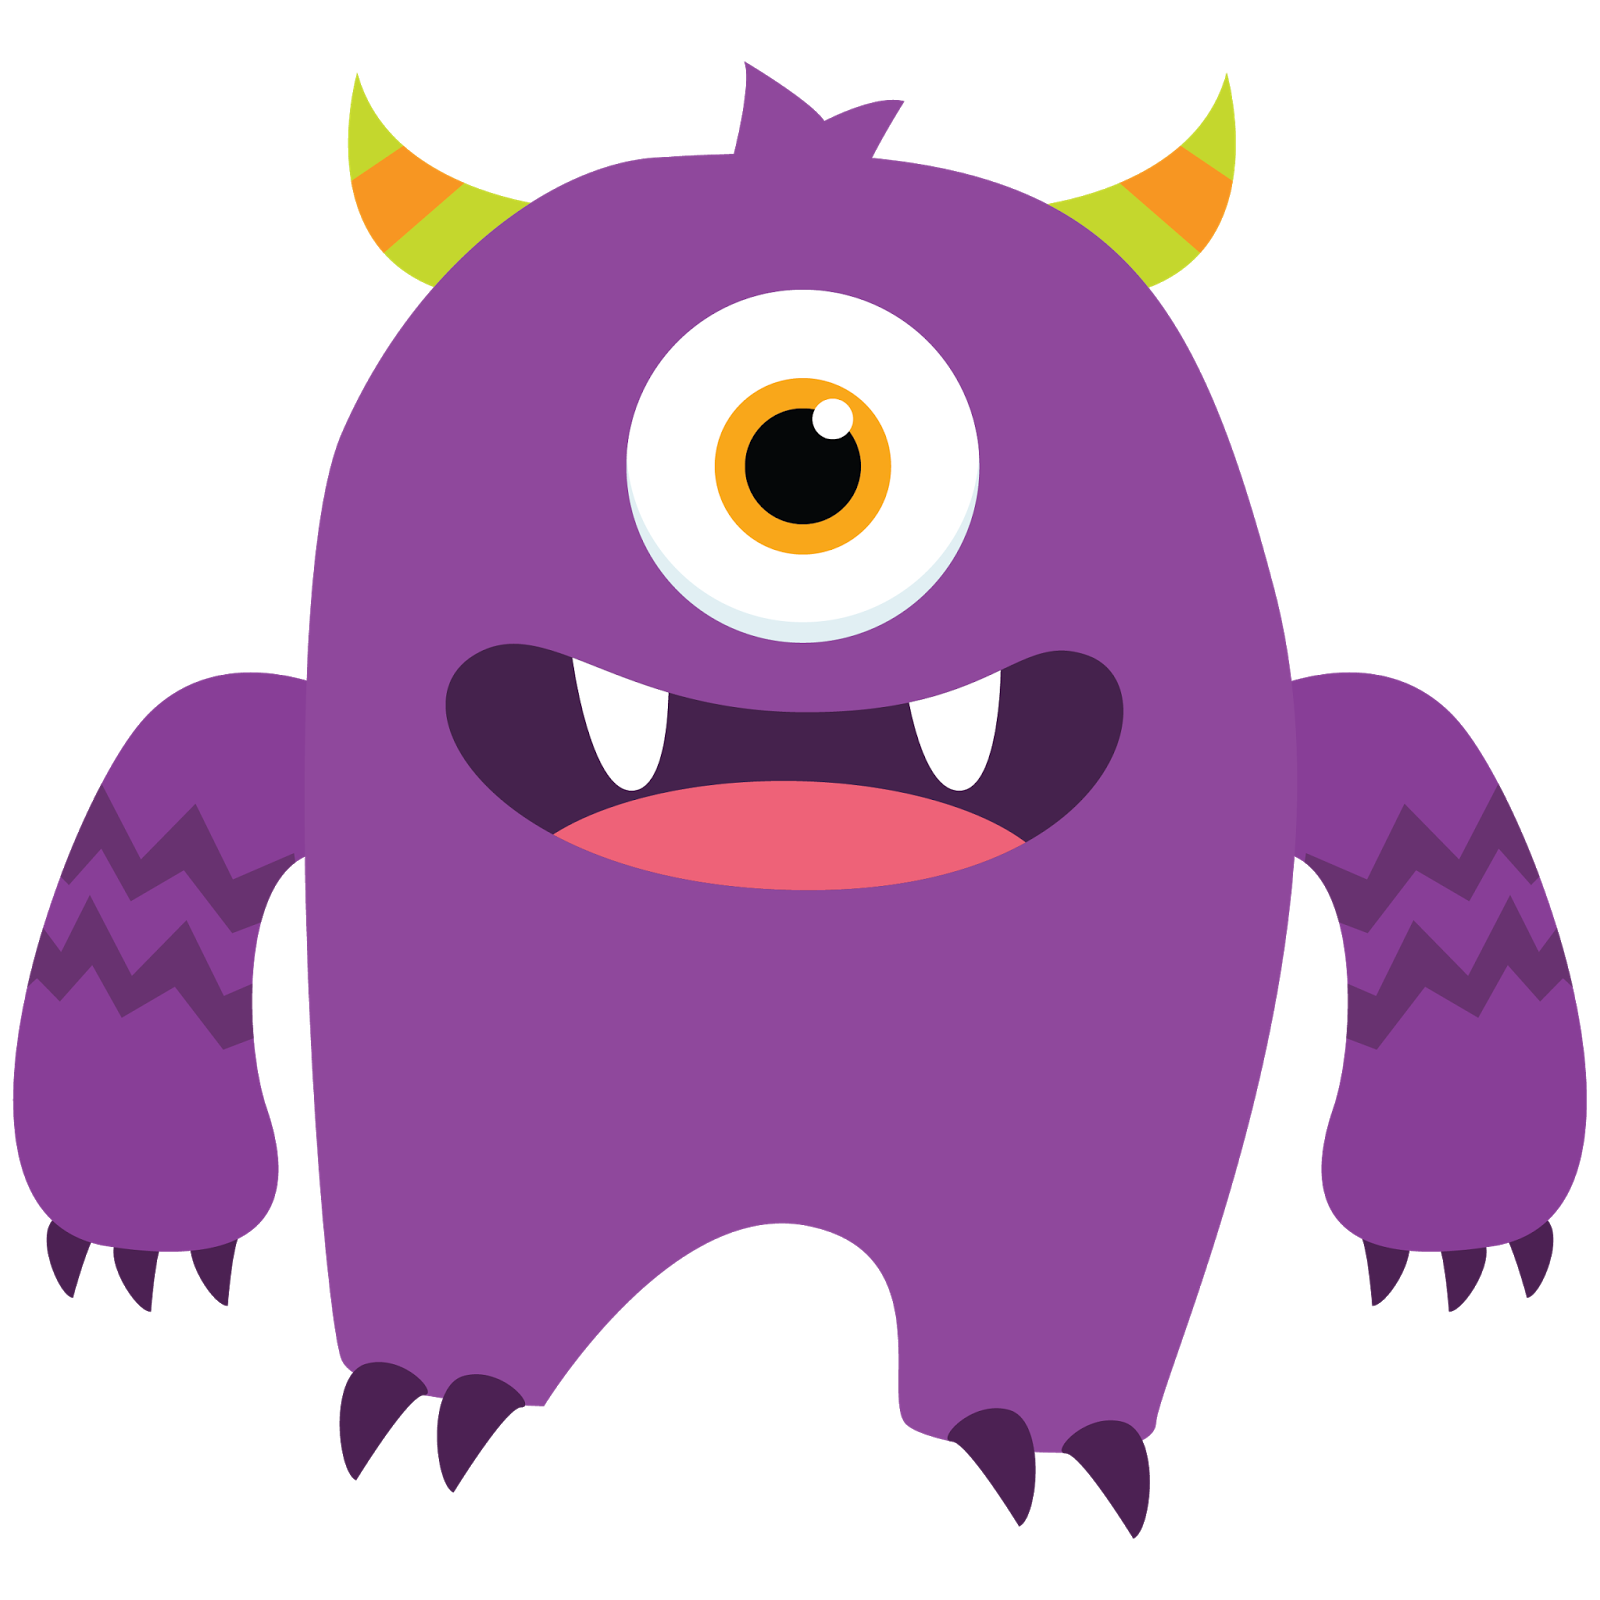 Free images cute pinterest. Clipart family monster